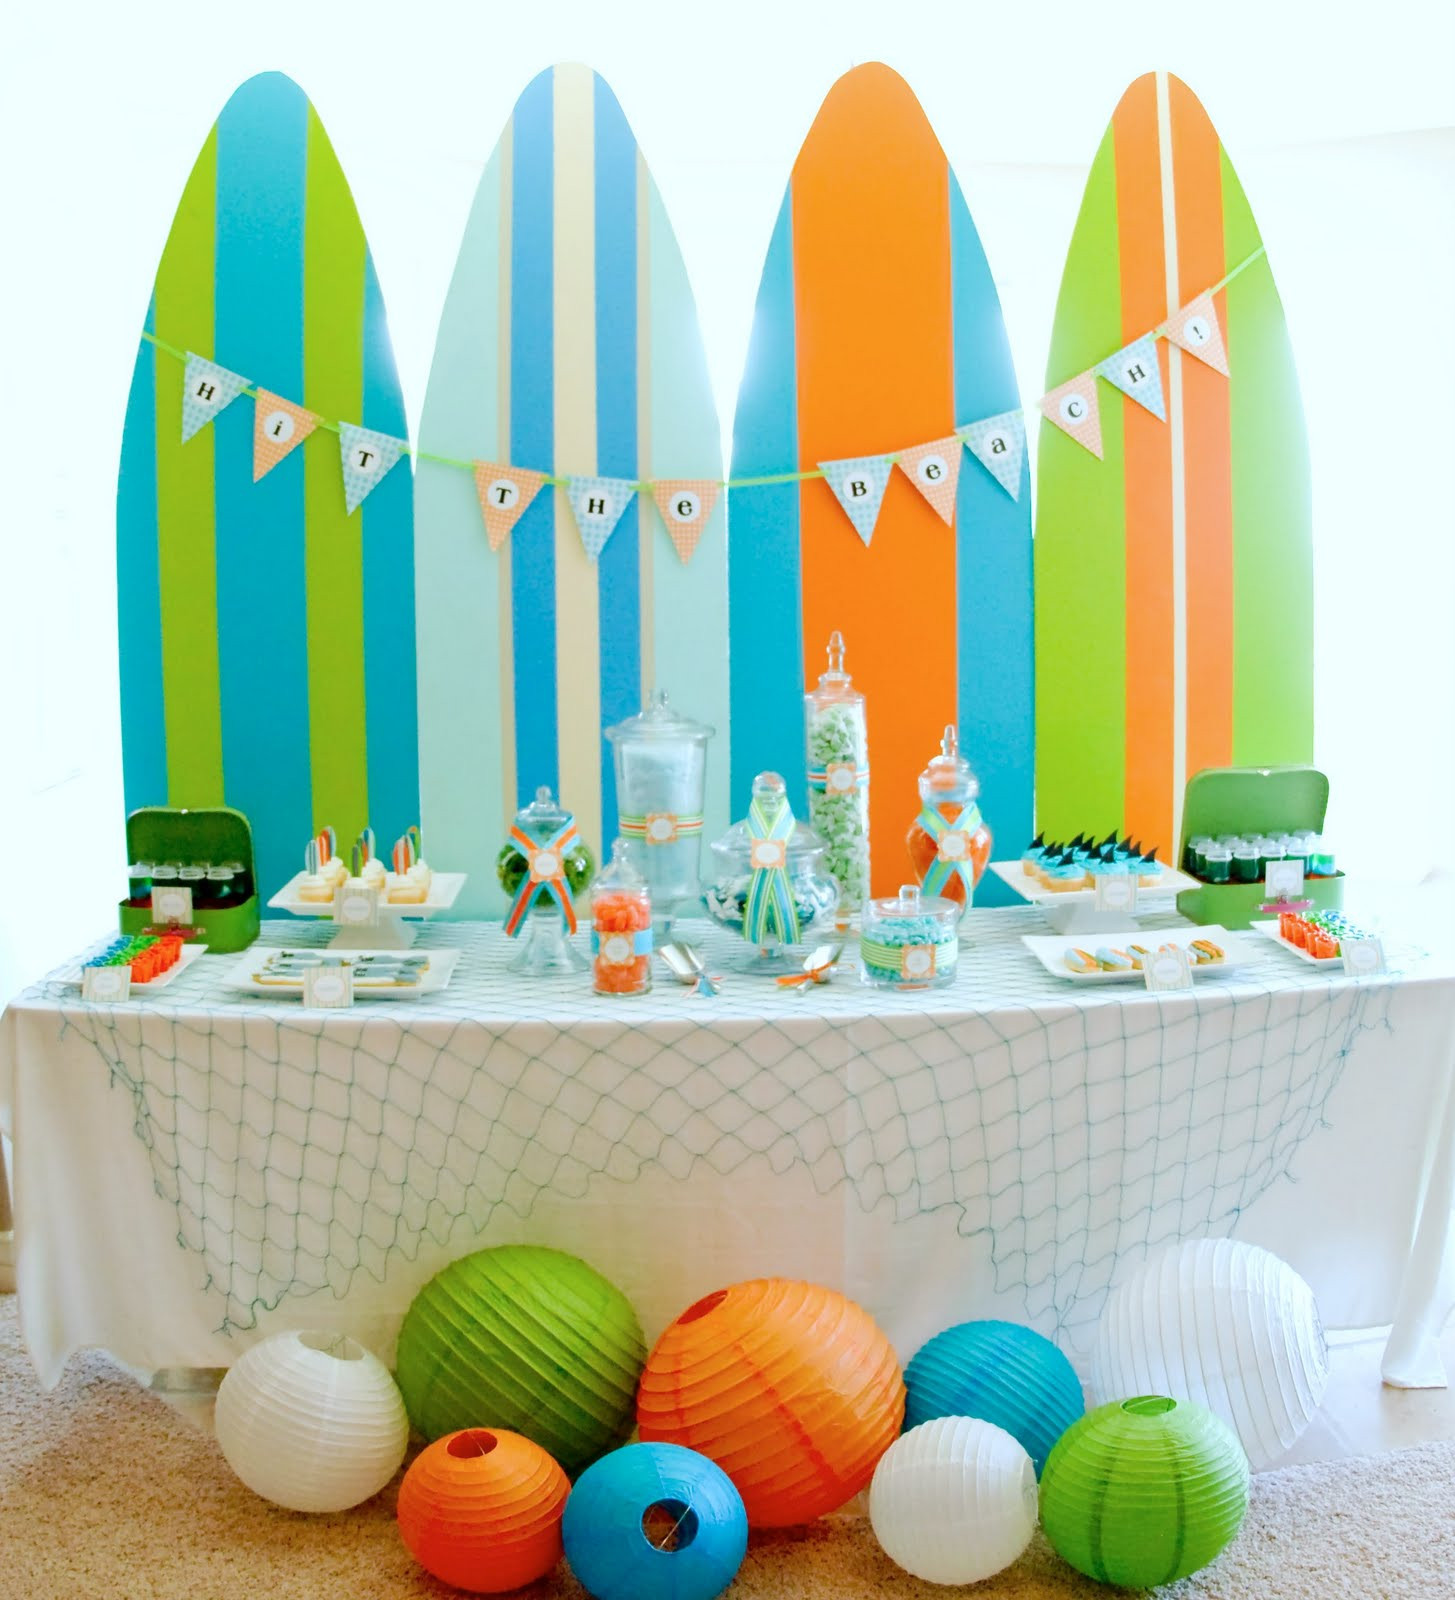 Pool Party Theme Ideas
 Kara s Party Ideas Surf s Up Summer Pool Party